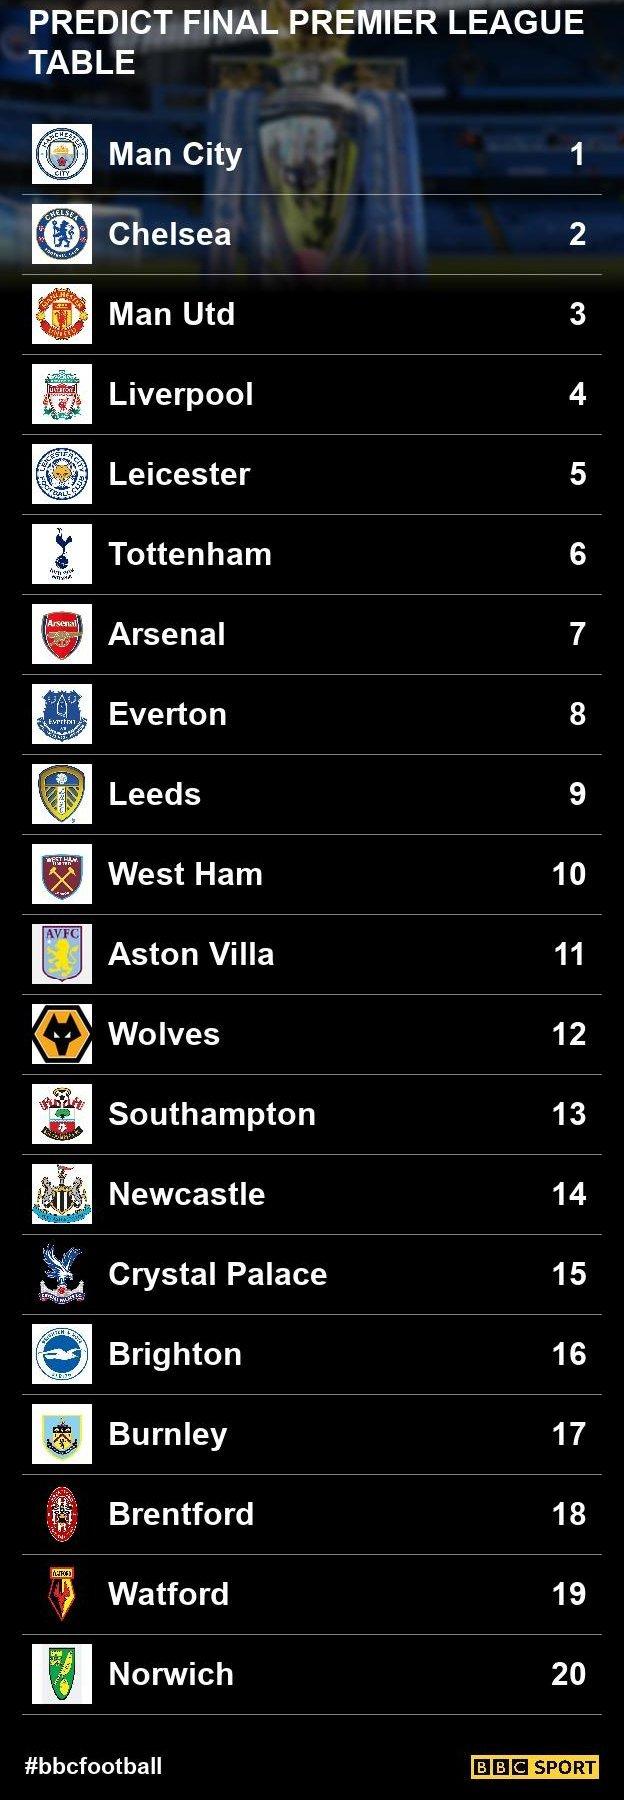 Premier League After 10 games, how did you see the final table looking?